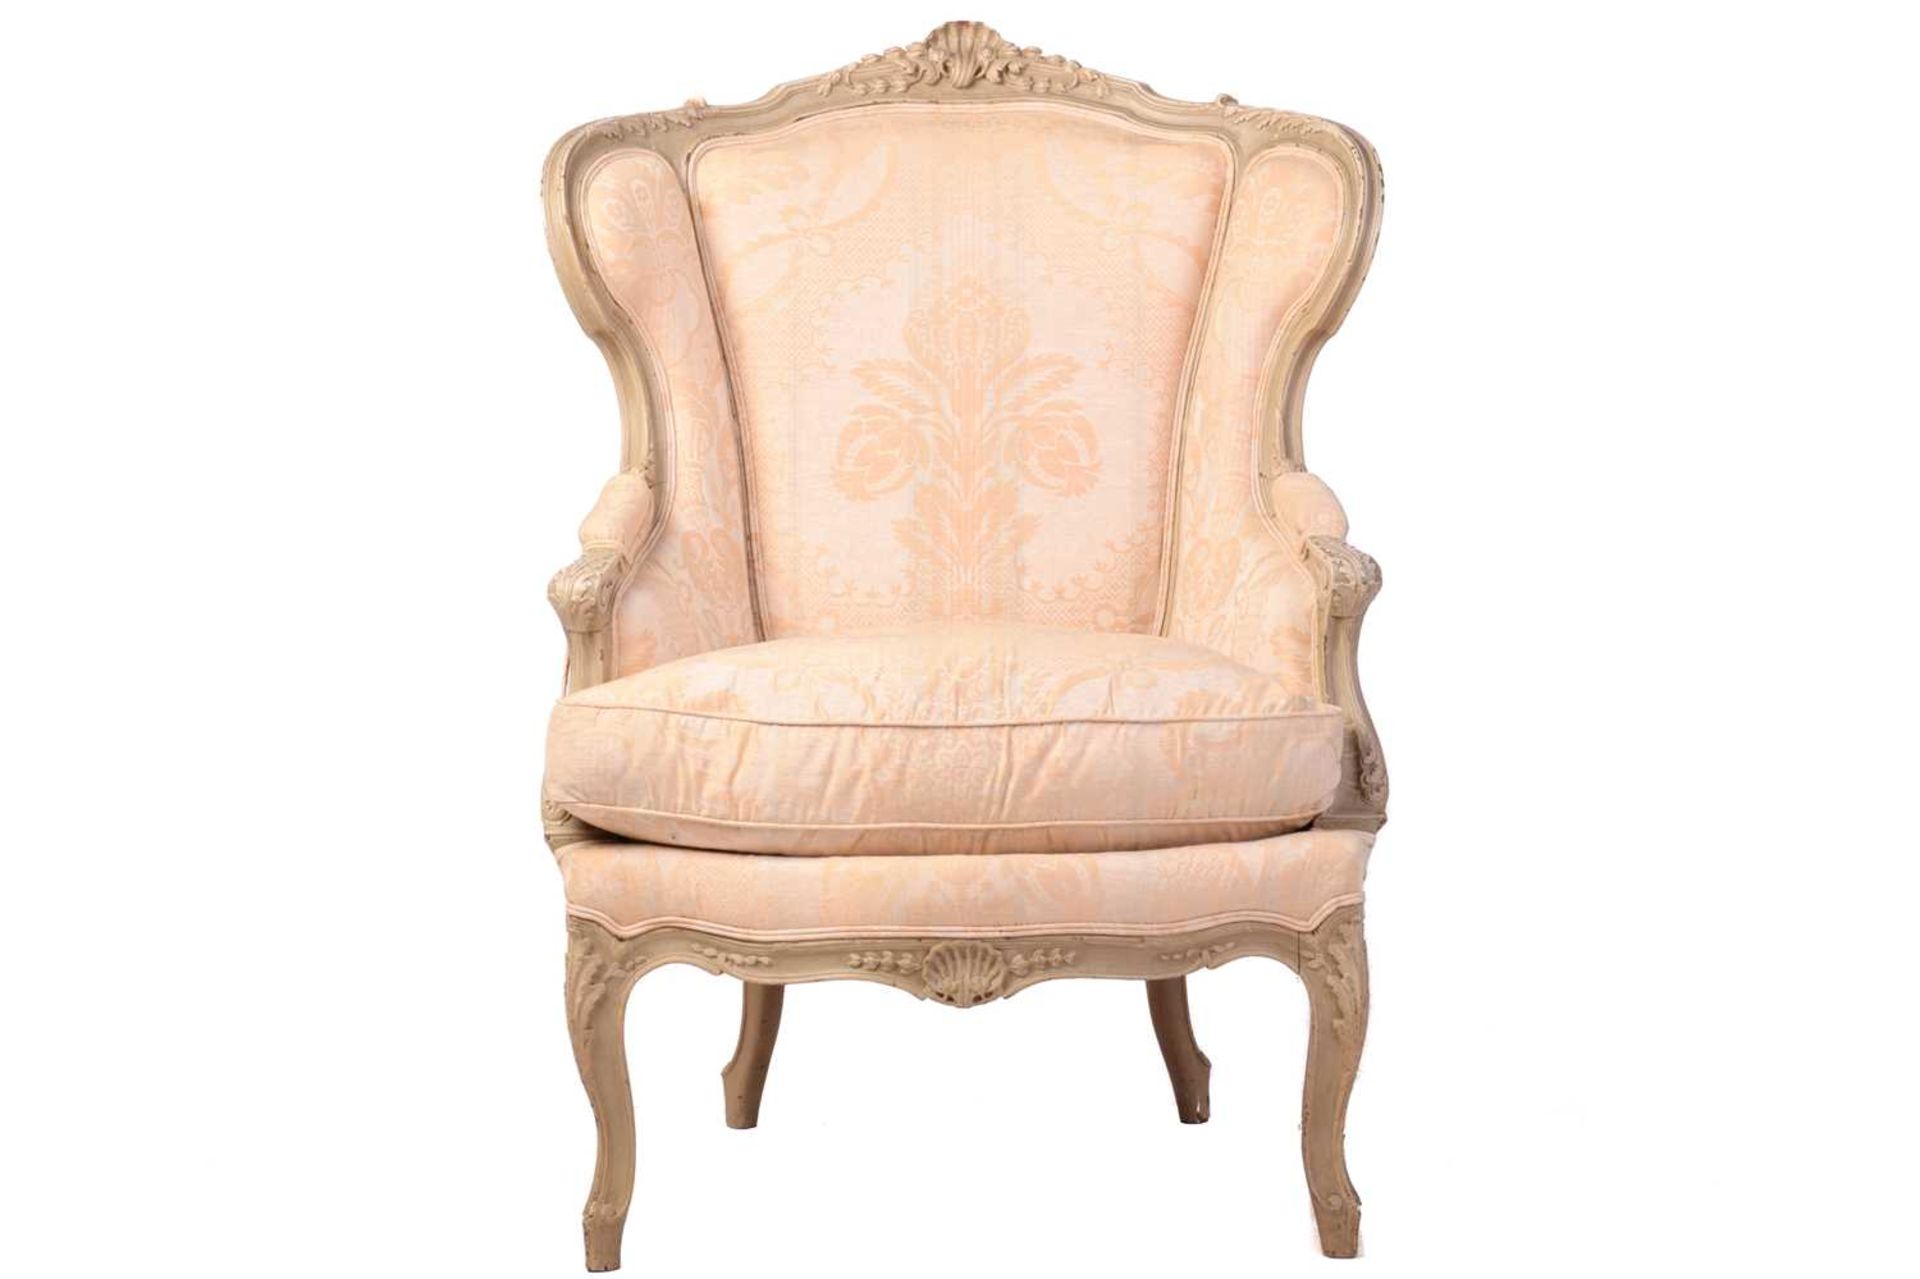 A French Louis XV-style dove grey painted bergere armchair with wing back and carved shell